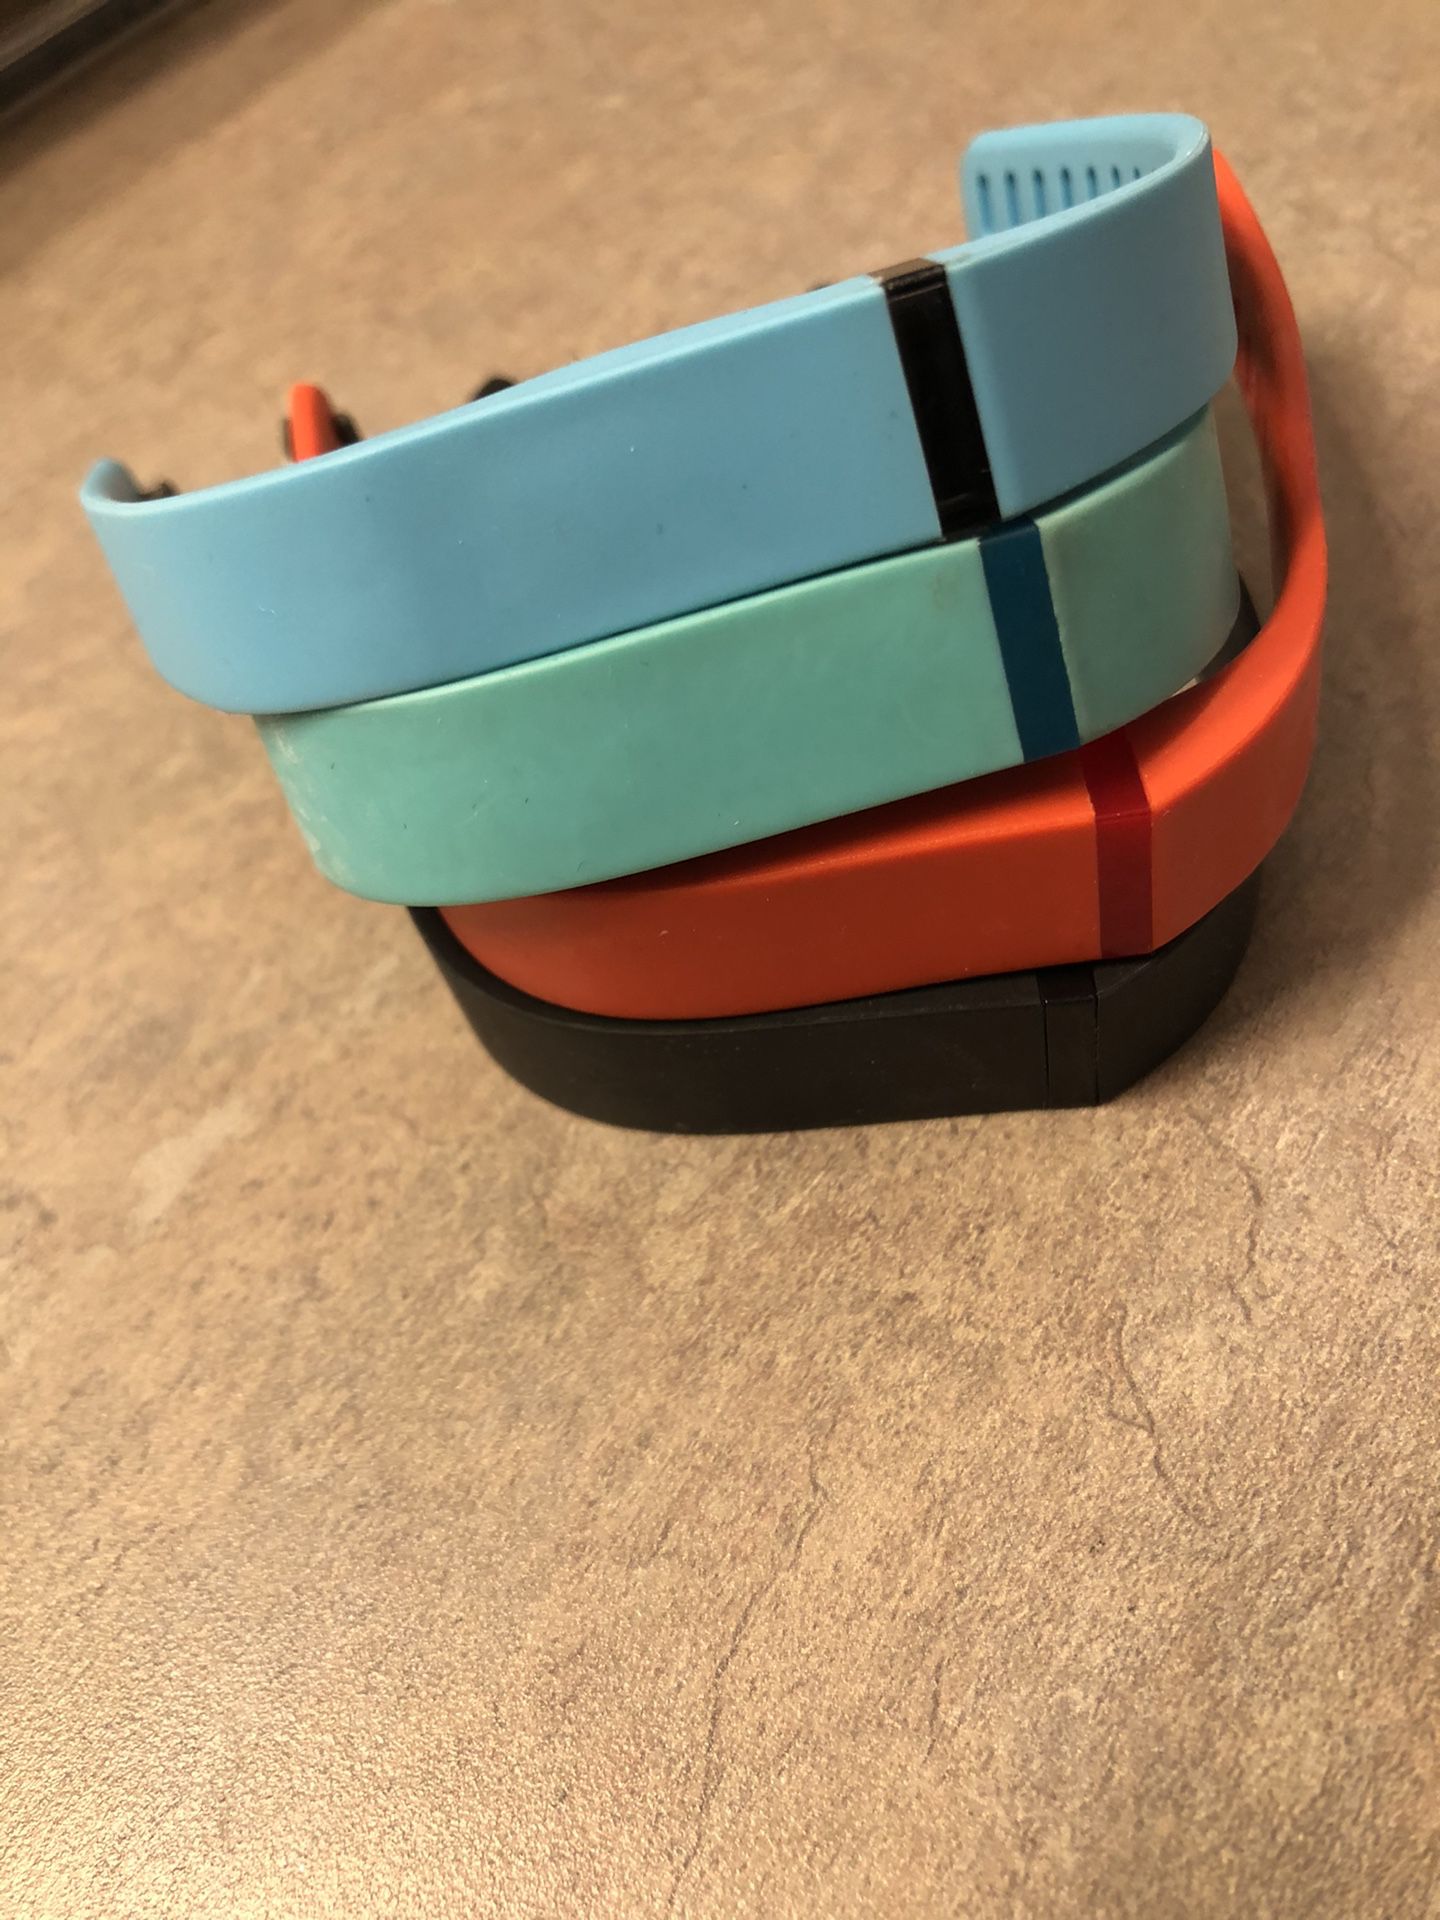 Fitbit bands (Fitbit not included)